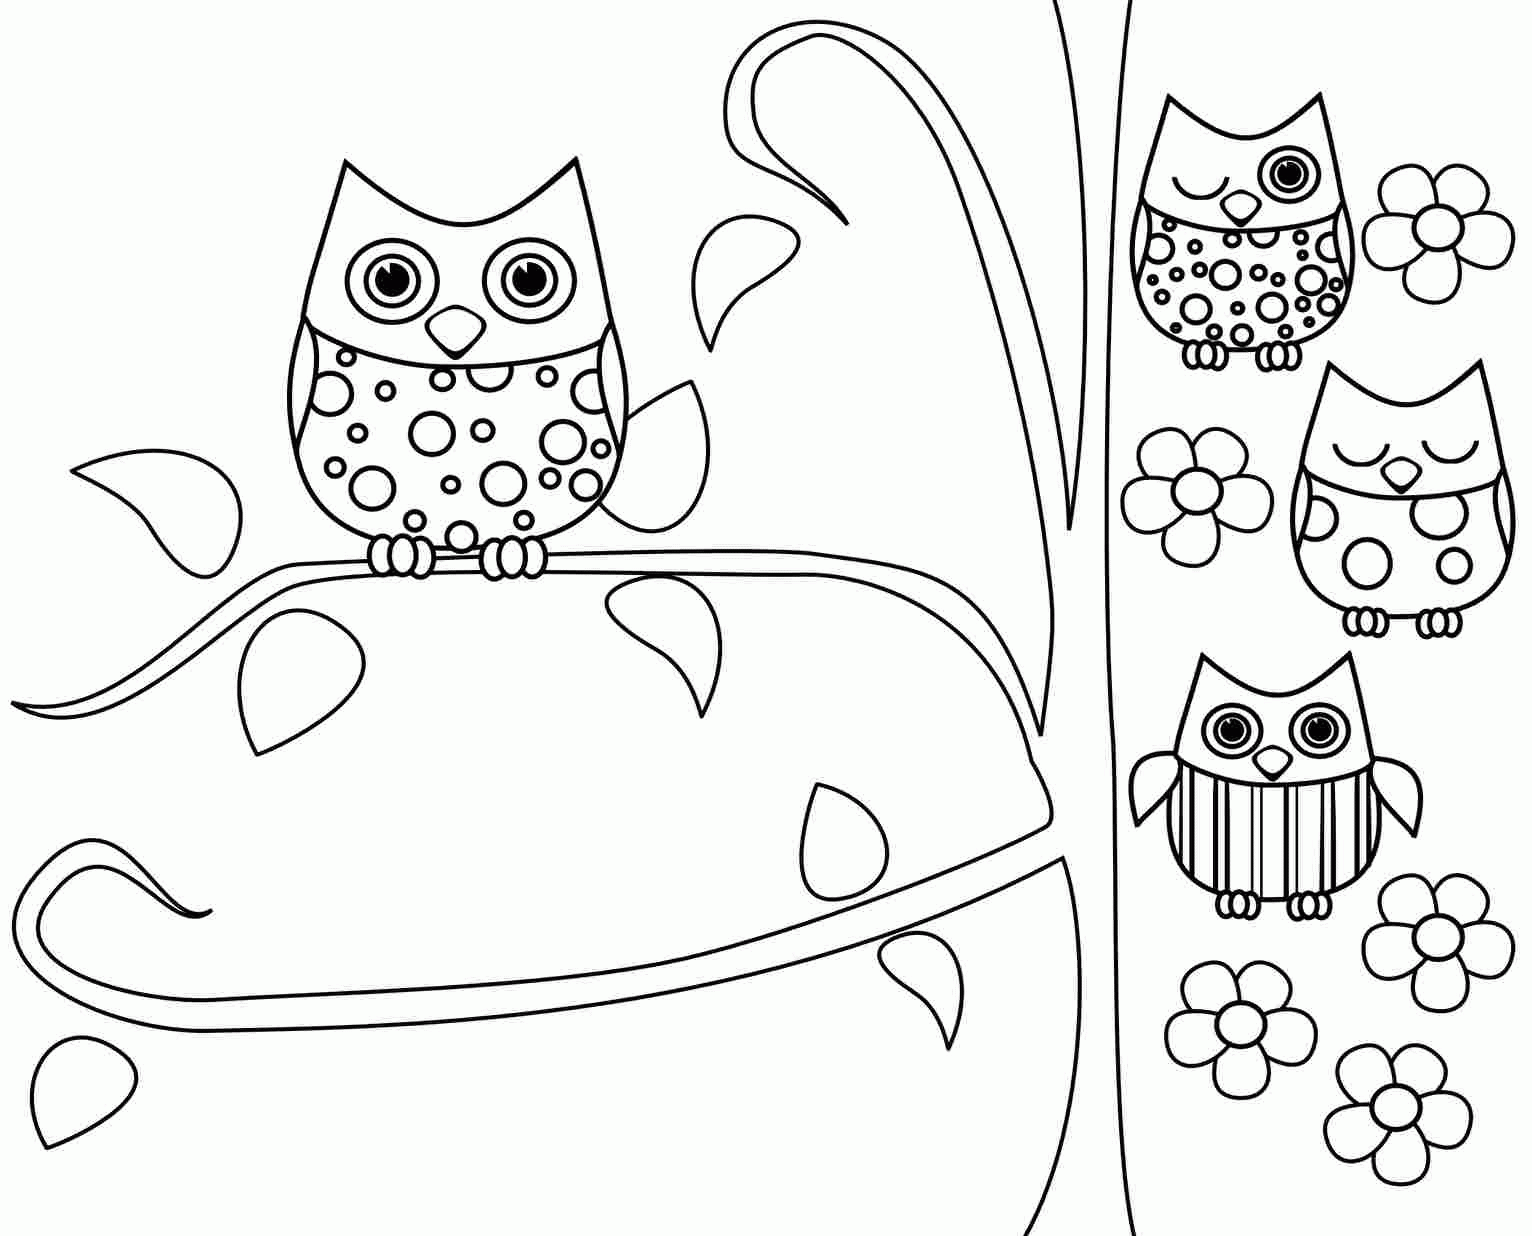 Coloring Pages Of Owl Babies - Coloring Home